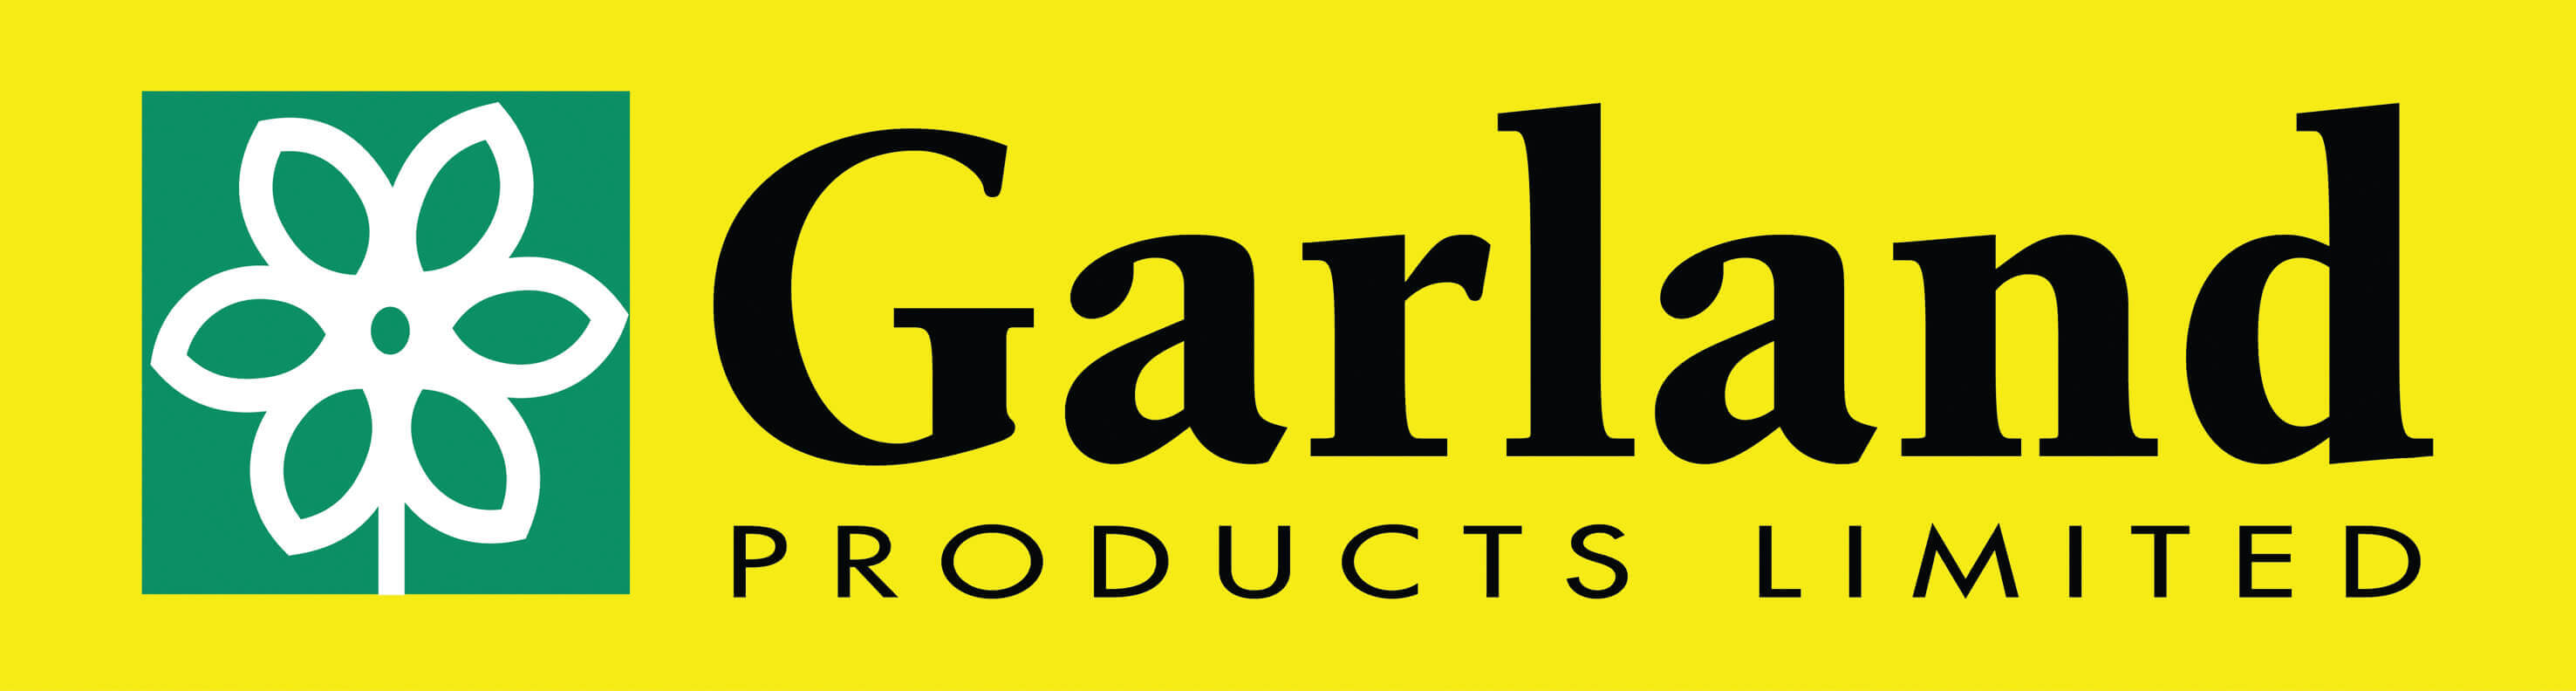 Garland - Master Products